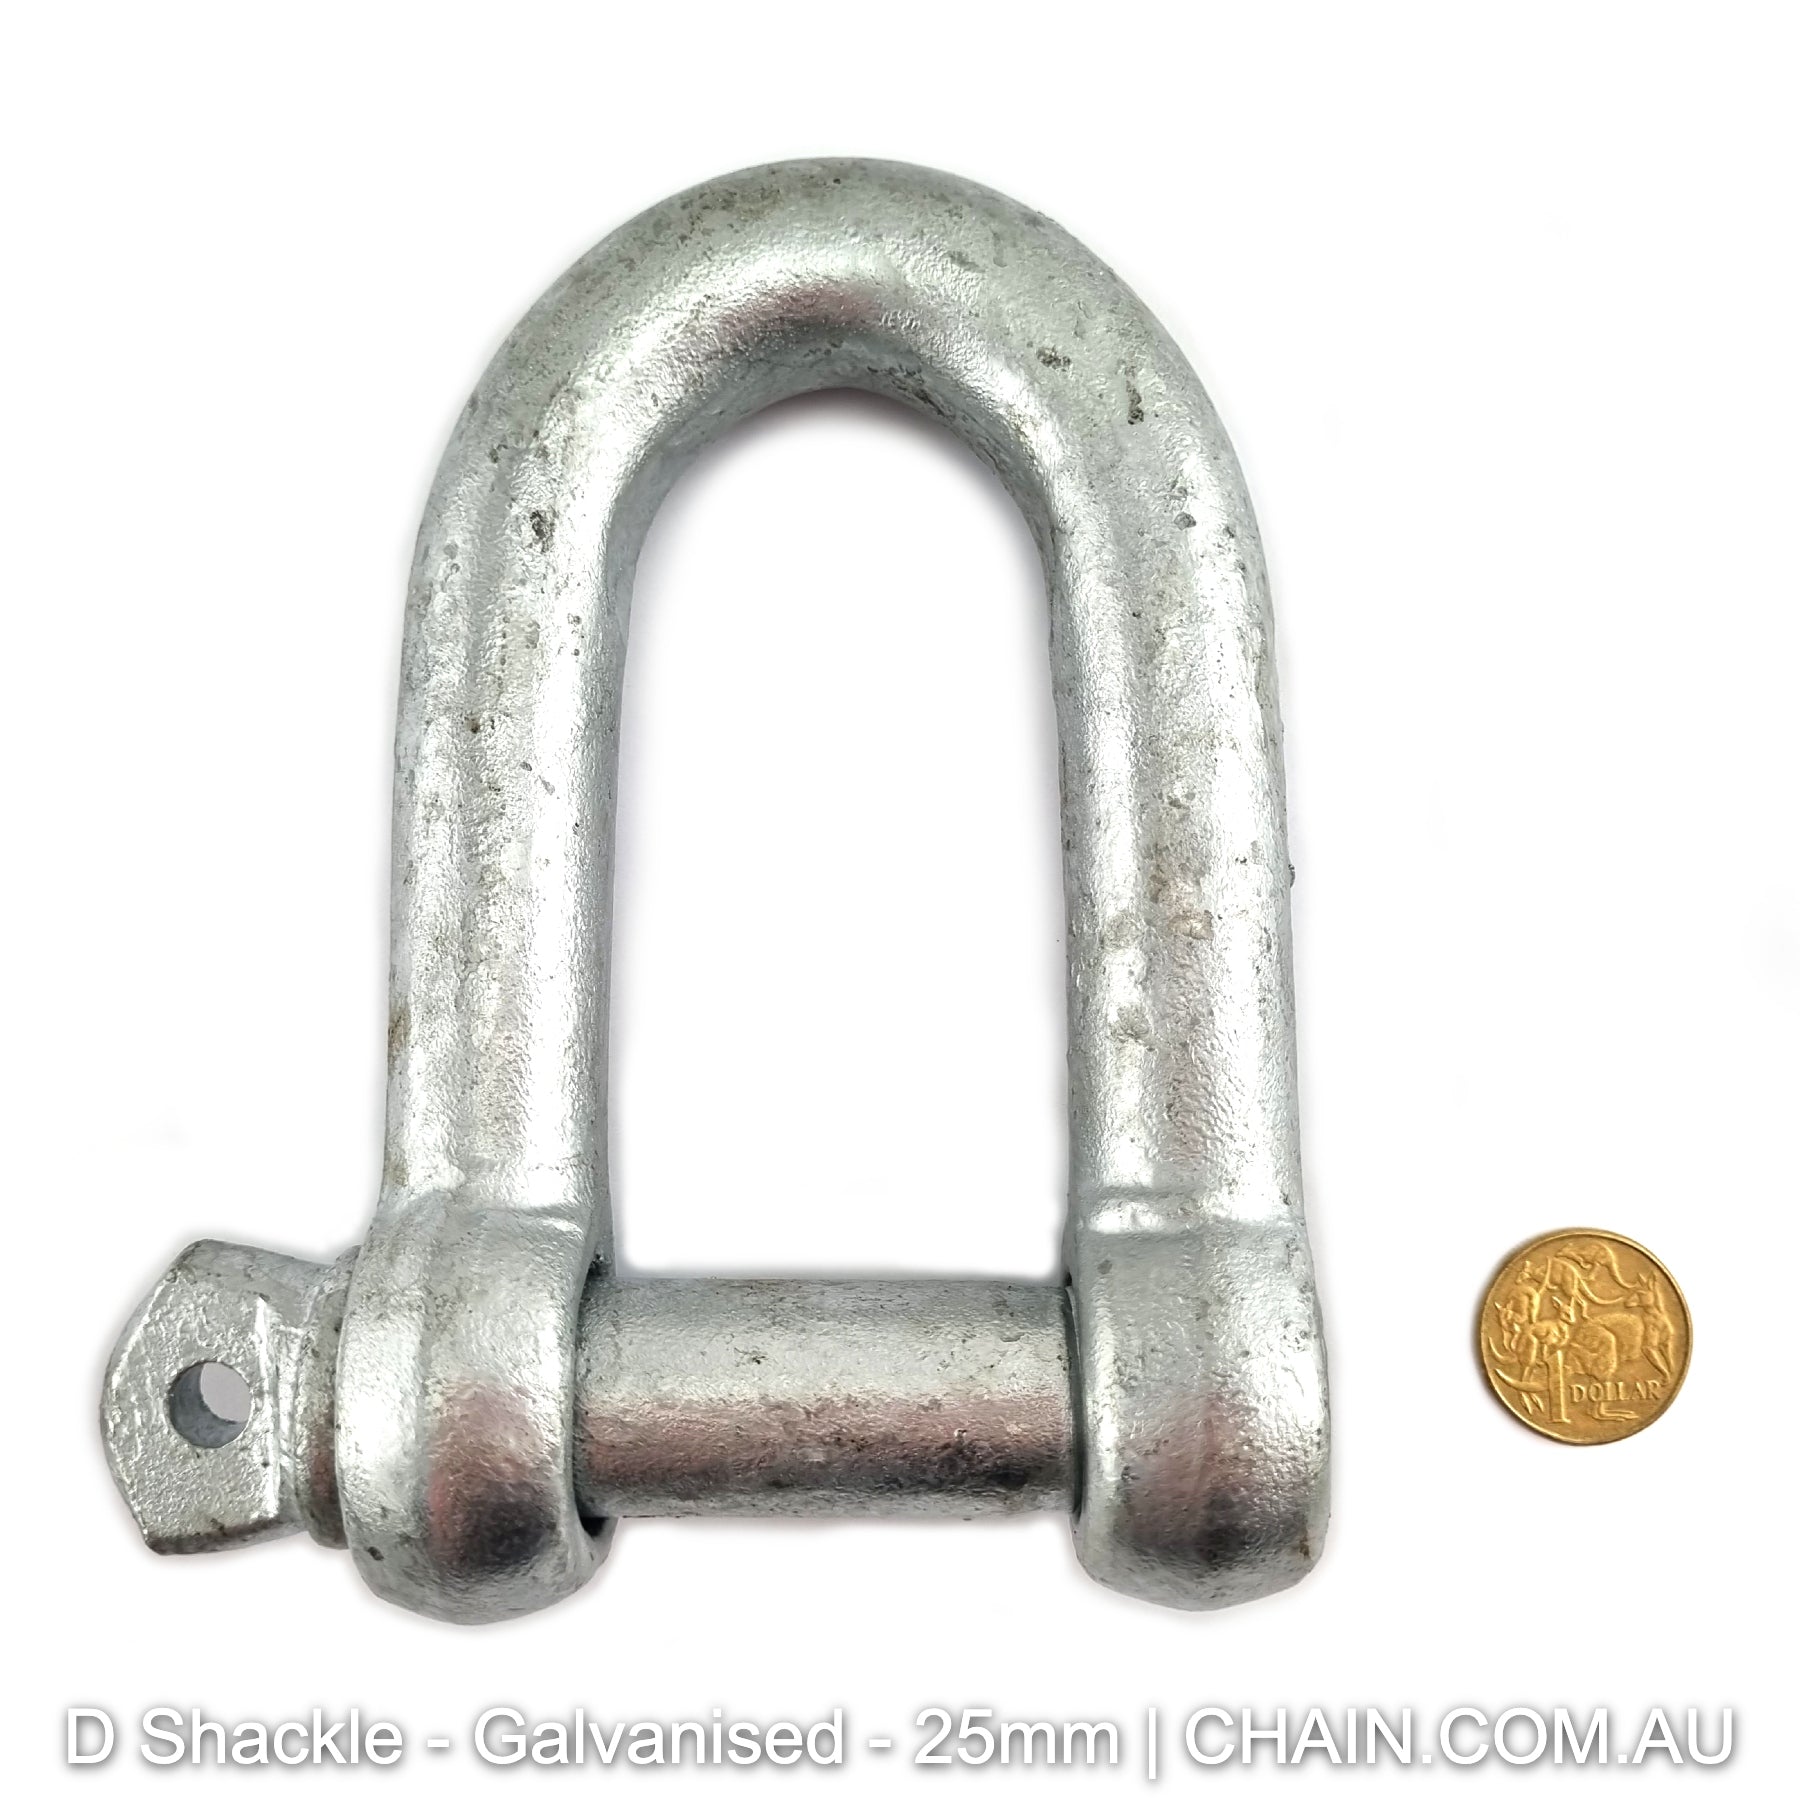 25mm Galvanised D Shackle. Shop D-Shackles and Hardware online at factory direct prices. Shipping Australia wide or Melbourne pick-up